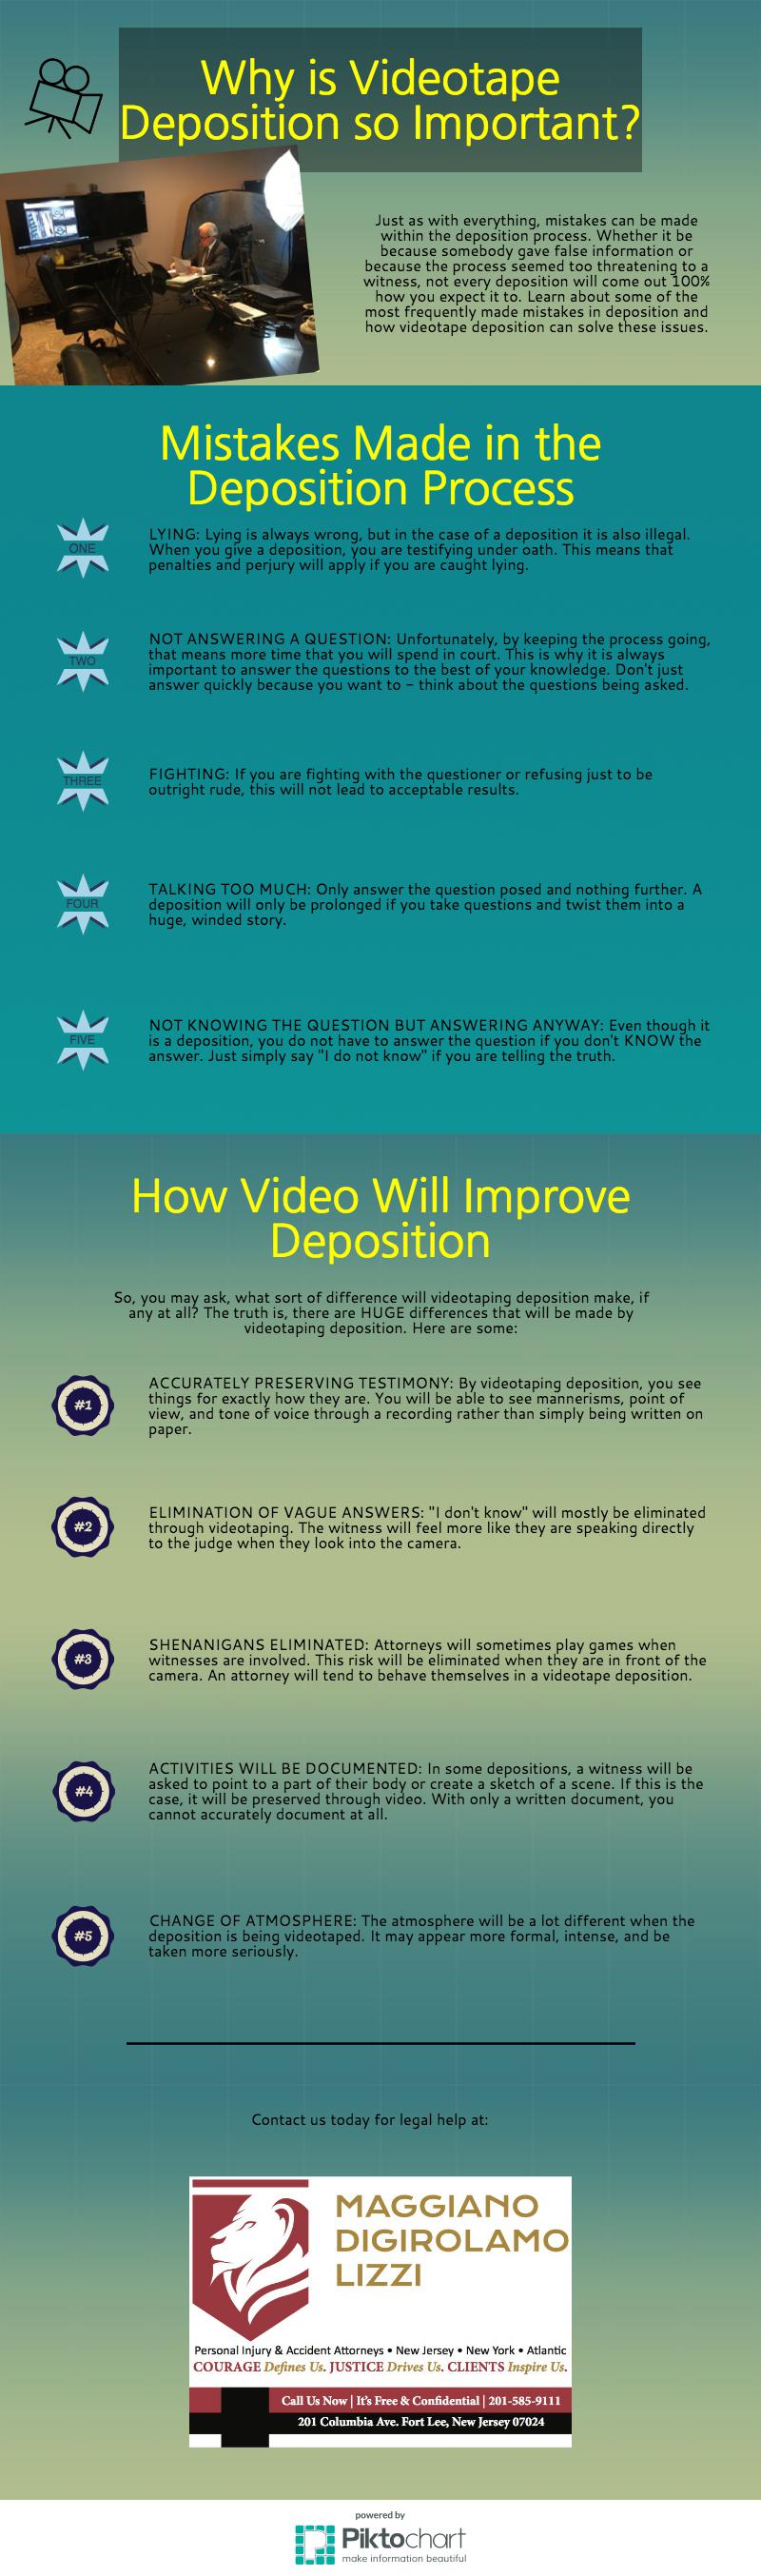 Videotape Deposition and Its Importance